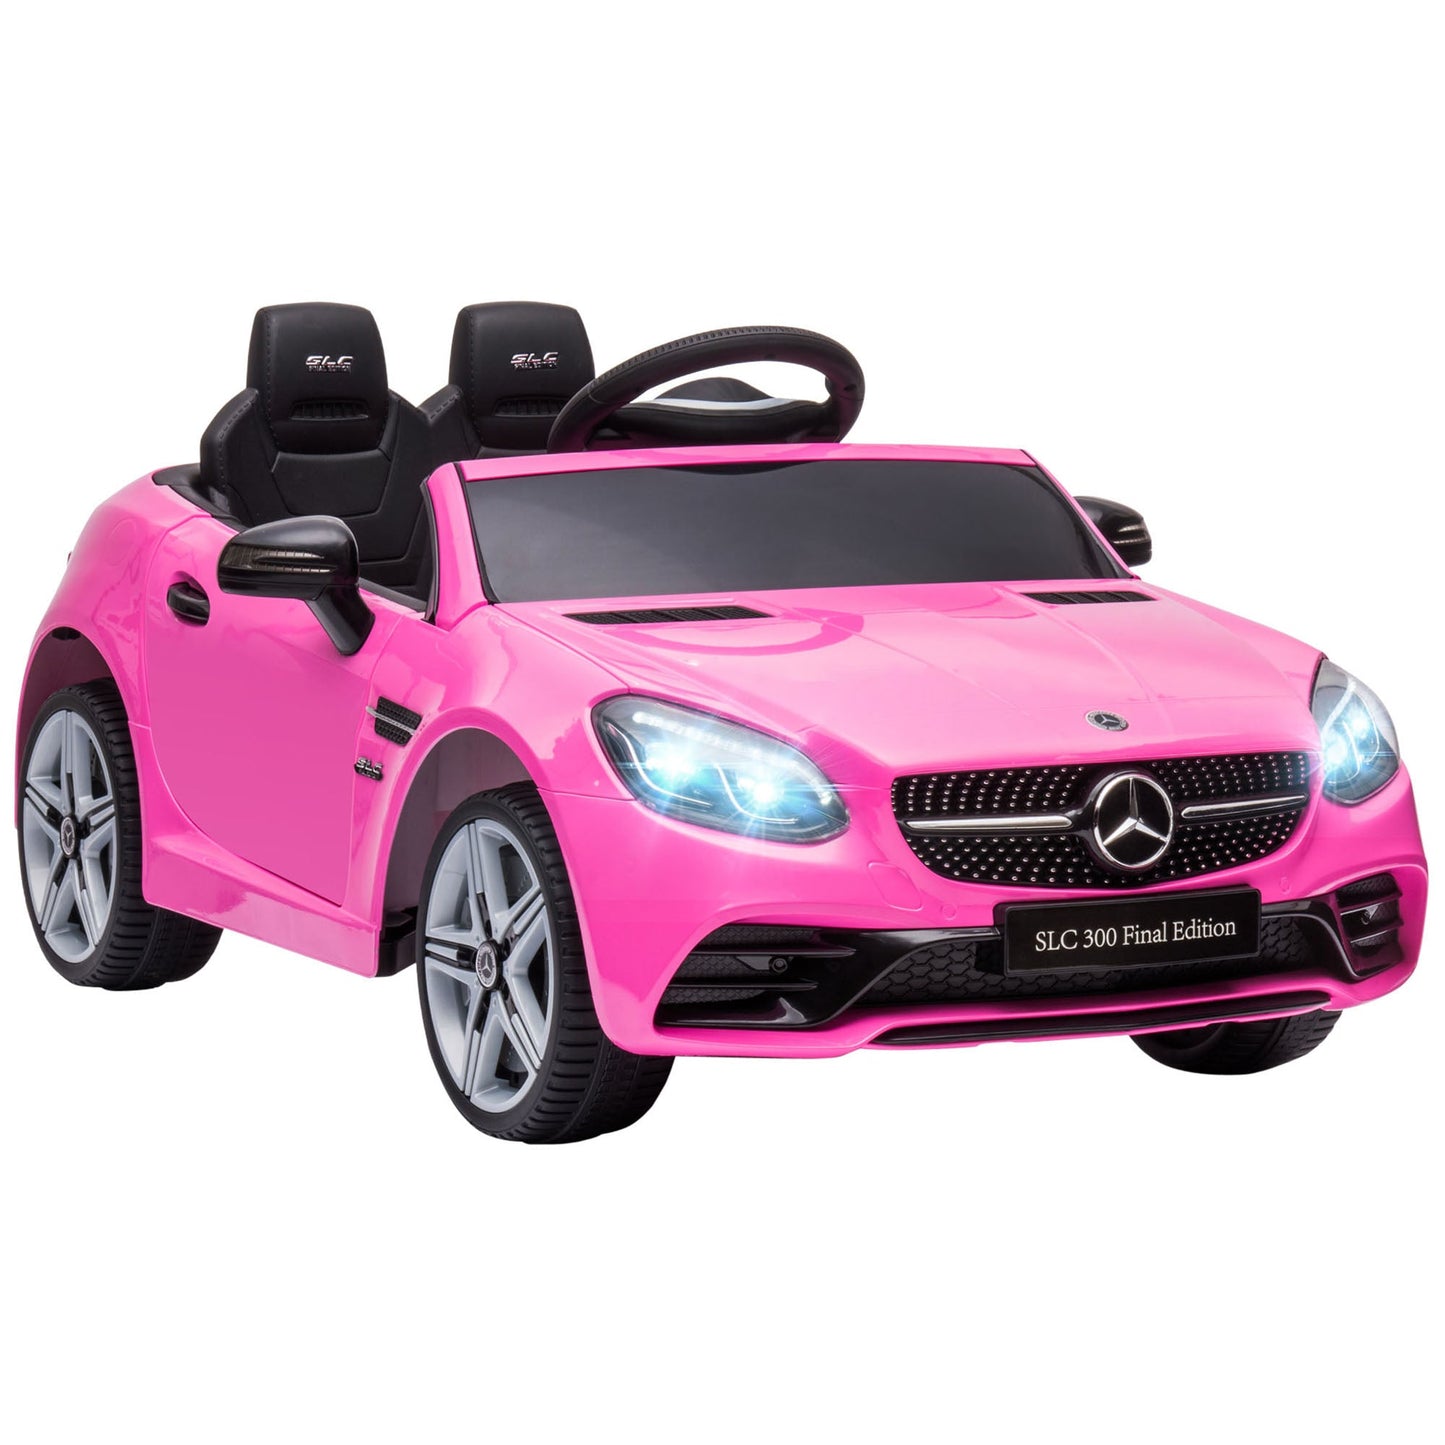 Toys and Games-12V Kids Electric Ride On Car with Parent Remote Control, 2 Motors, Music, Lights & Suspension Wheels for 3-6 Years Old, Gift for Children, Pink - Outdoor Style Company